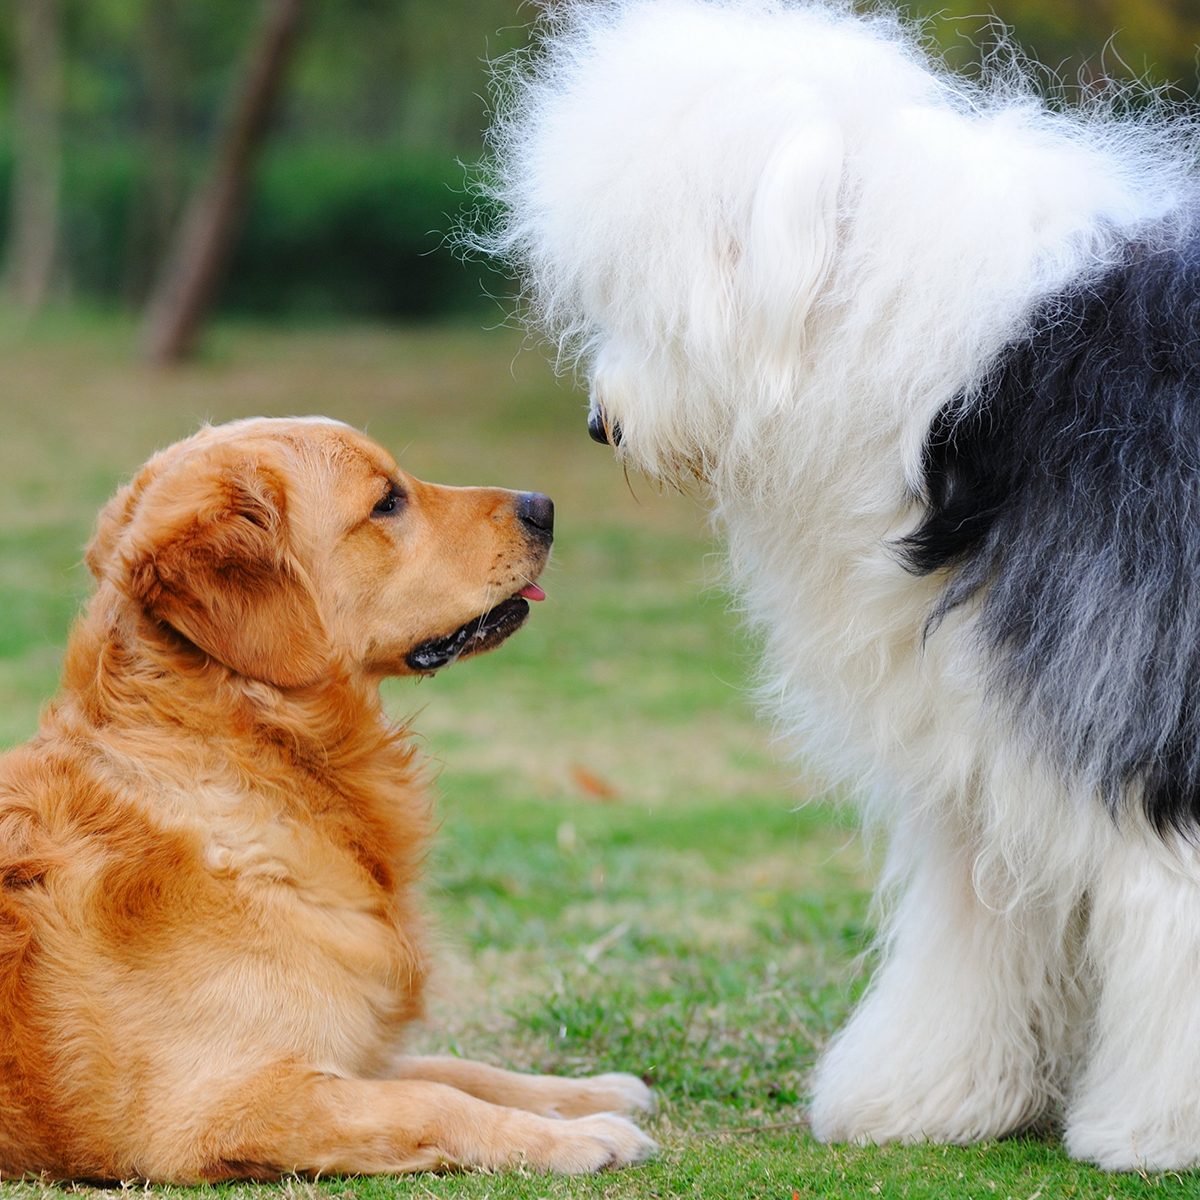 Golden retriever laying down and looking up at a standing English sheepdog